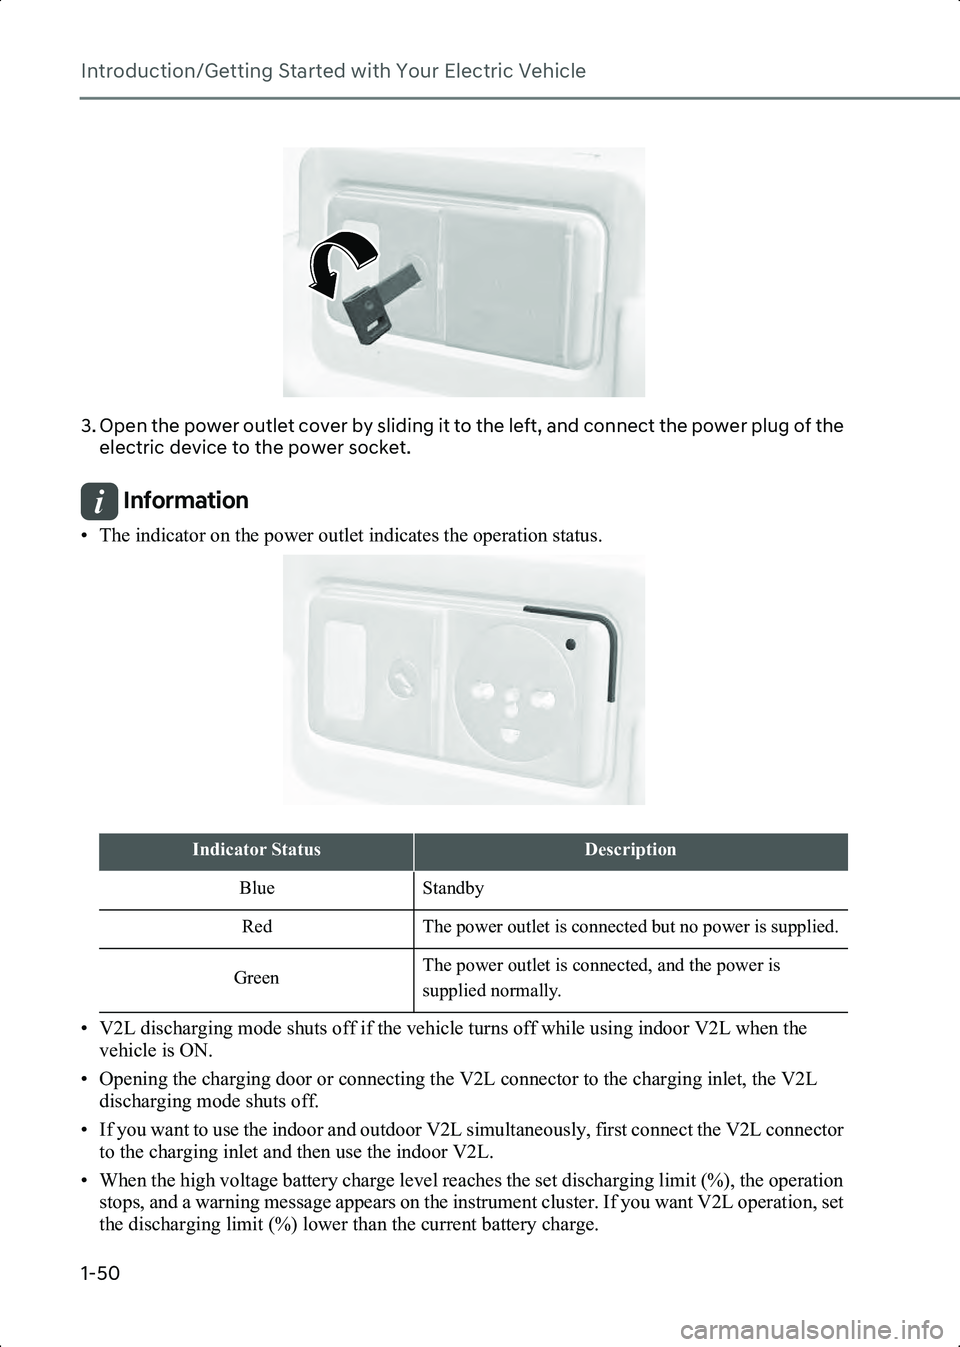 HYUNDAI IONIQ 6 2023  Owners Manual Introduction/Getting Started with Your Electric Vehicle
1-50
B0002502
3. Open the power outlet cover by sliding it to the left, and connect the power plug of the electric device to the power socket.
I